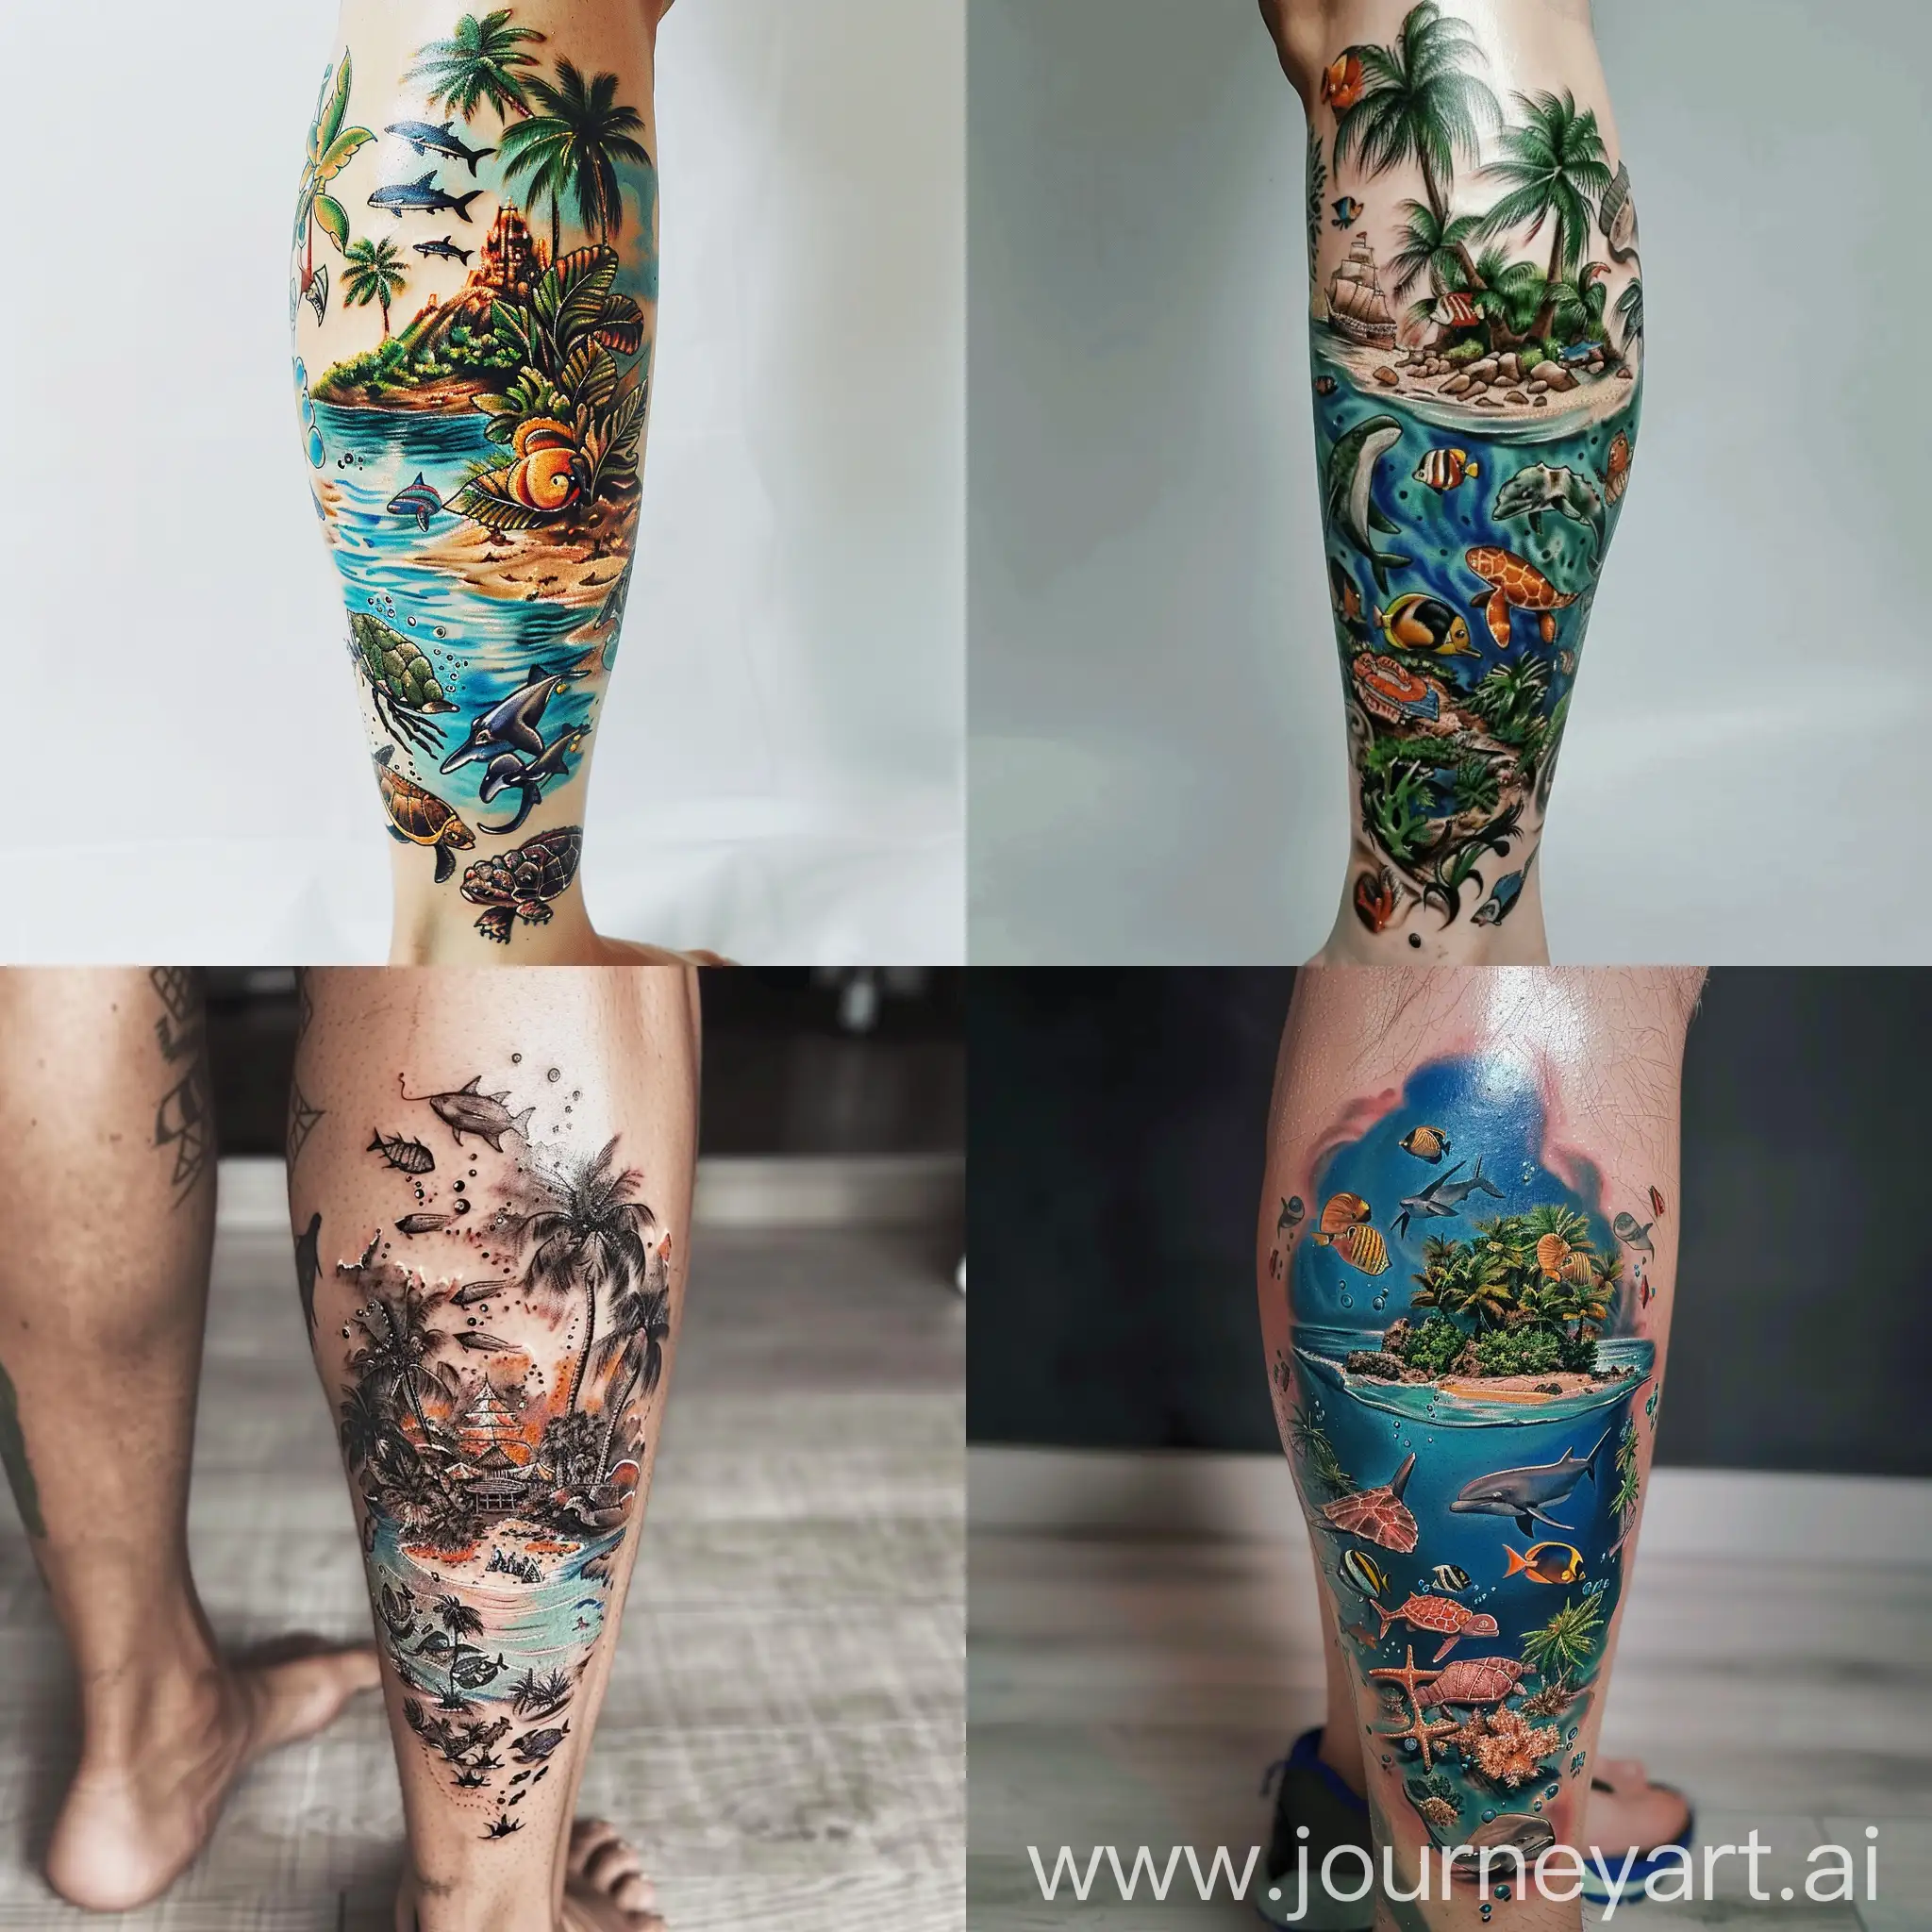 
full tatoo design for a calf of an island and tropical ocean creatures
